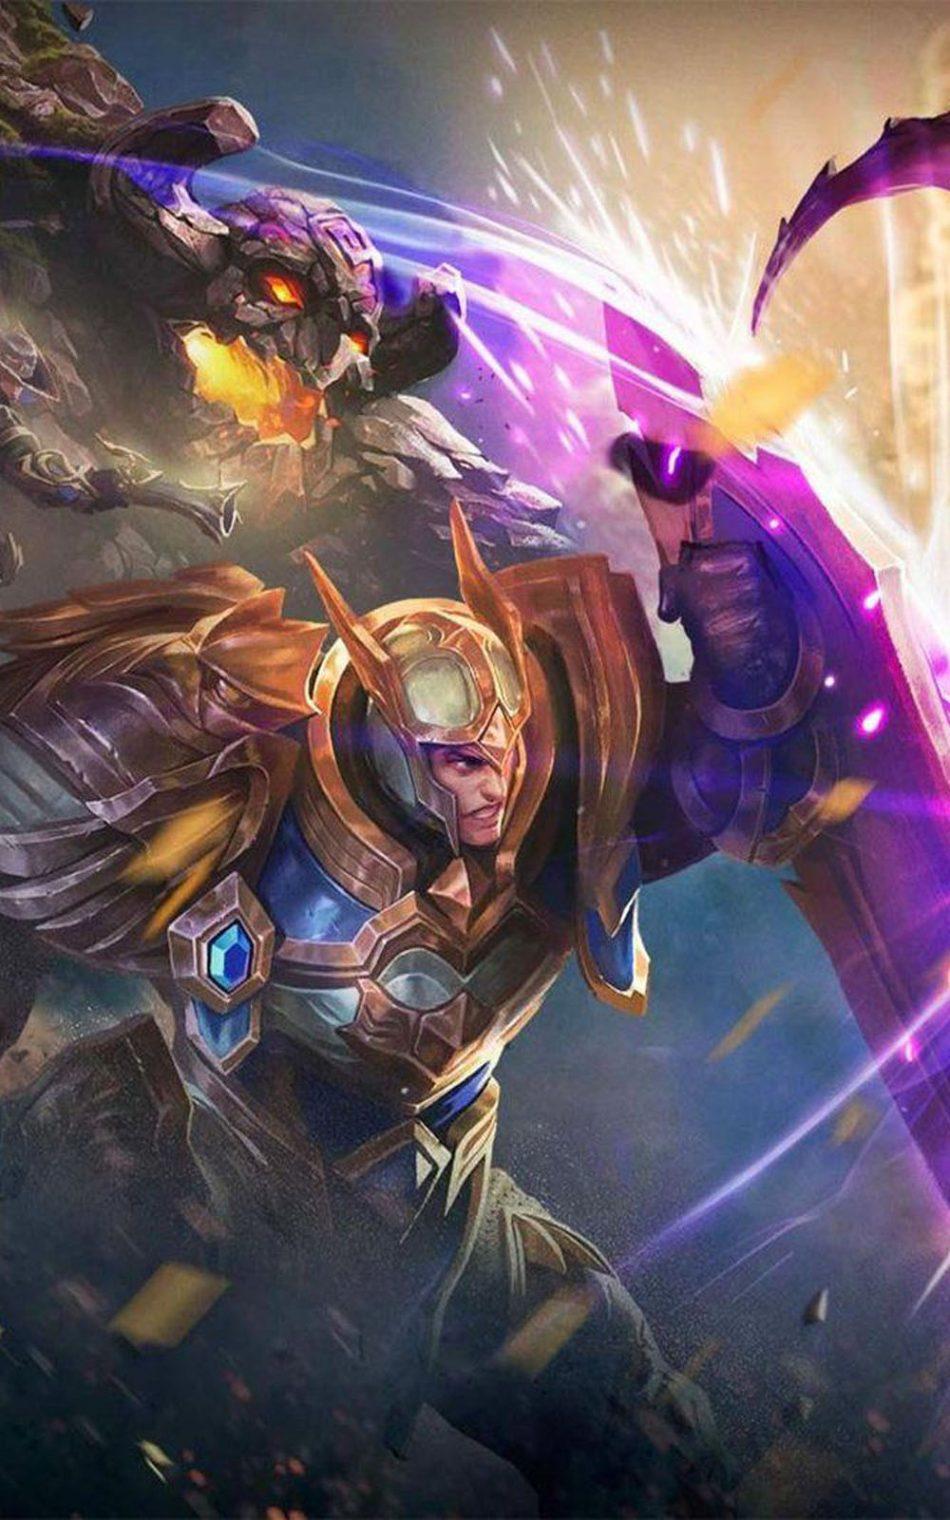 Download Thane Arena of Valor Free Pure 4K Ultra HD Mobile Wallpaper